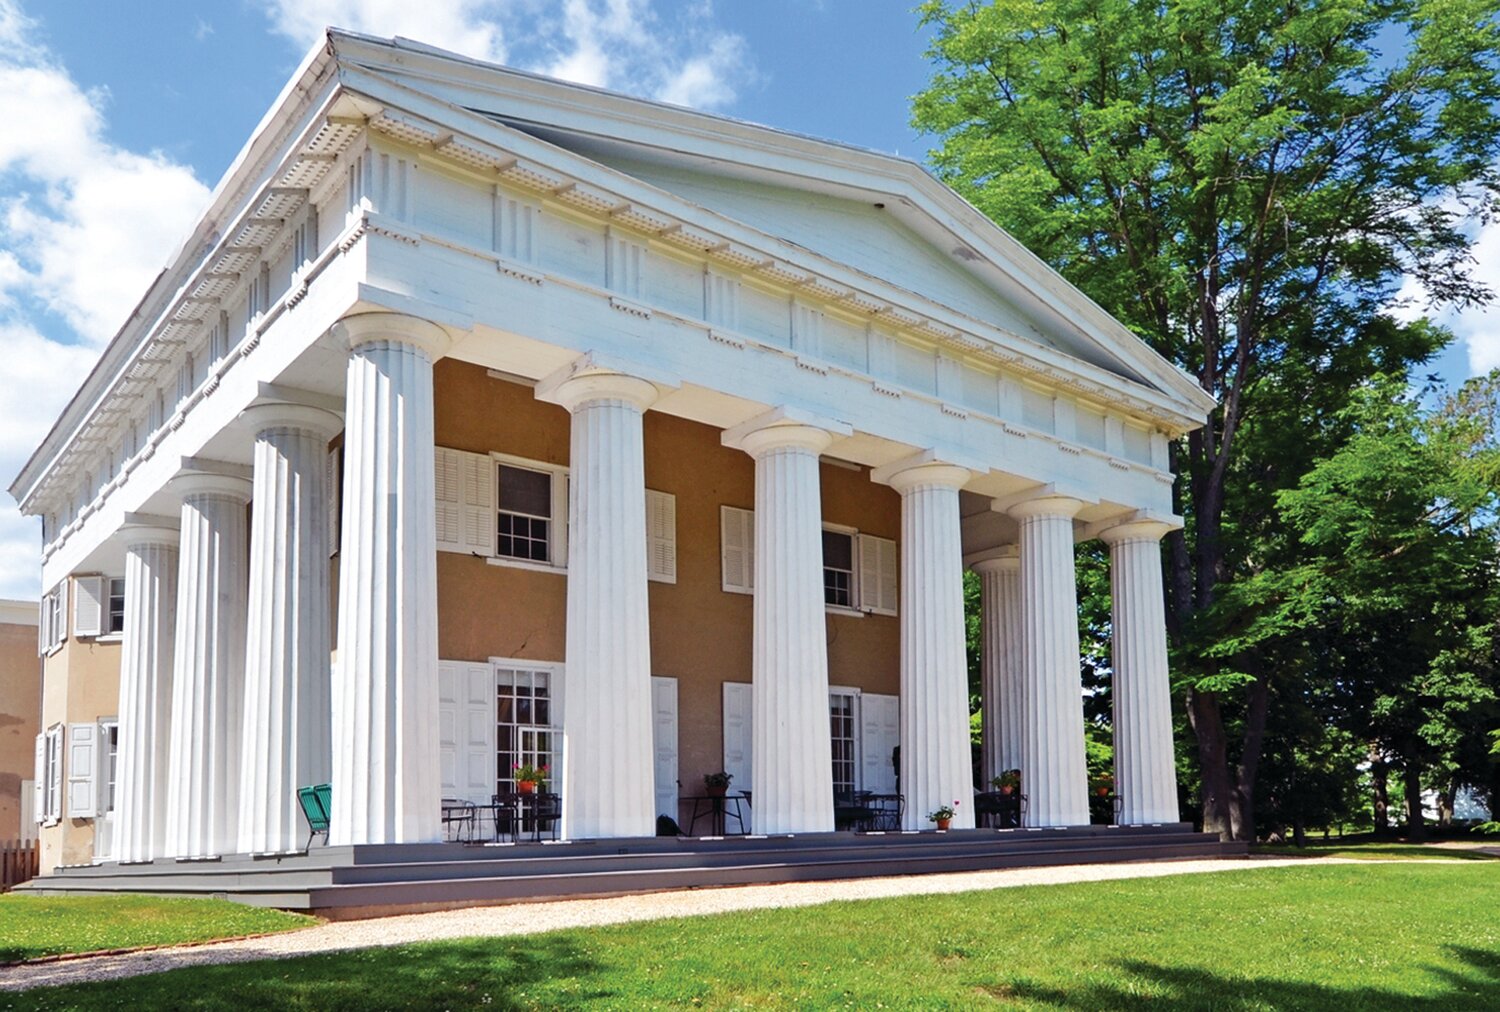 Andalusia’s historic house, built in 1797, was designated a National Historic Landmark in 1966.